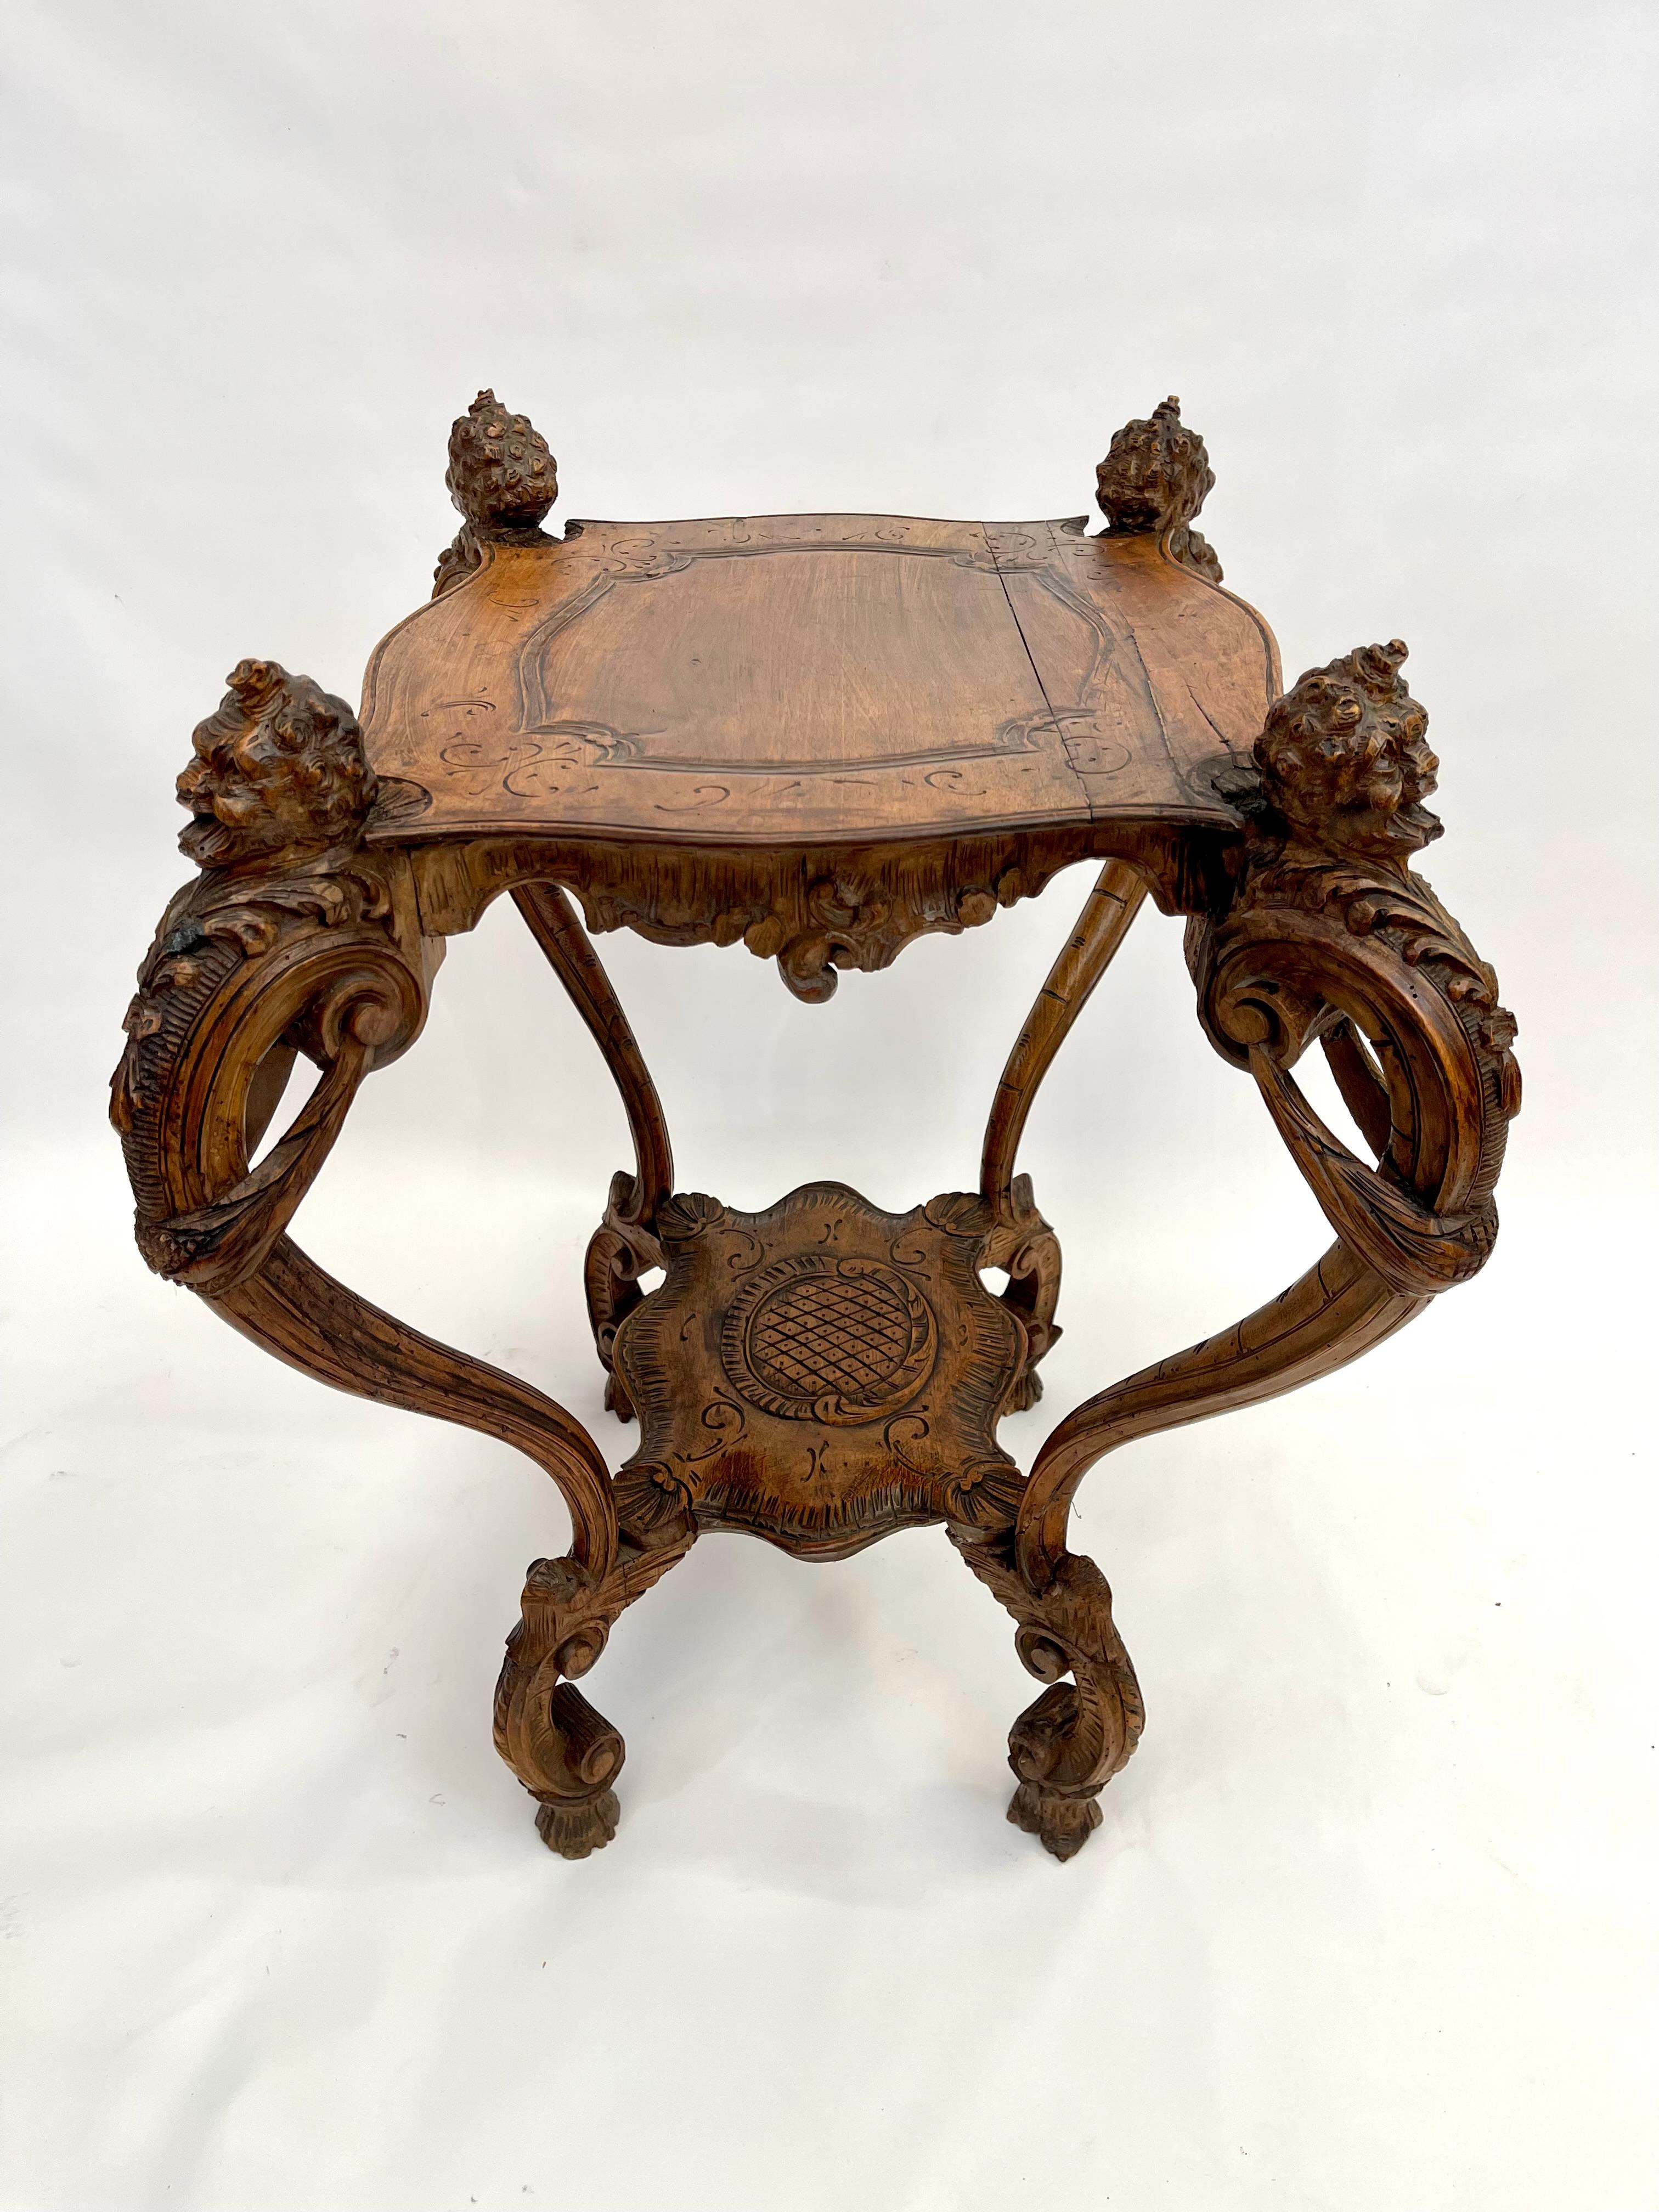 Antique 18th Century Violin-Shaped Center Table console with Carved Natural Wood Apron Shelf.
At each corner of the table, there is a sculpted head.
The entire piece is beautifully crafted and sculpted.
18th-century Baroque tables were often